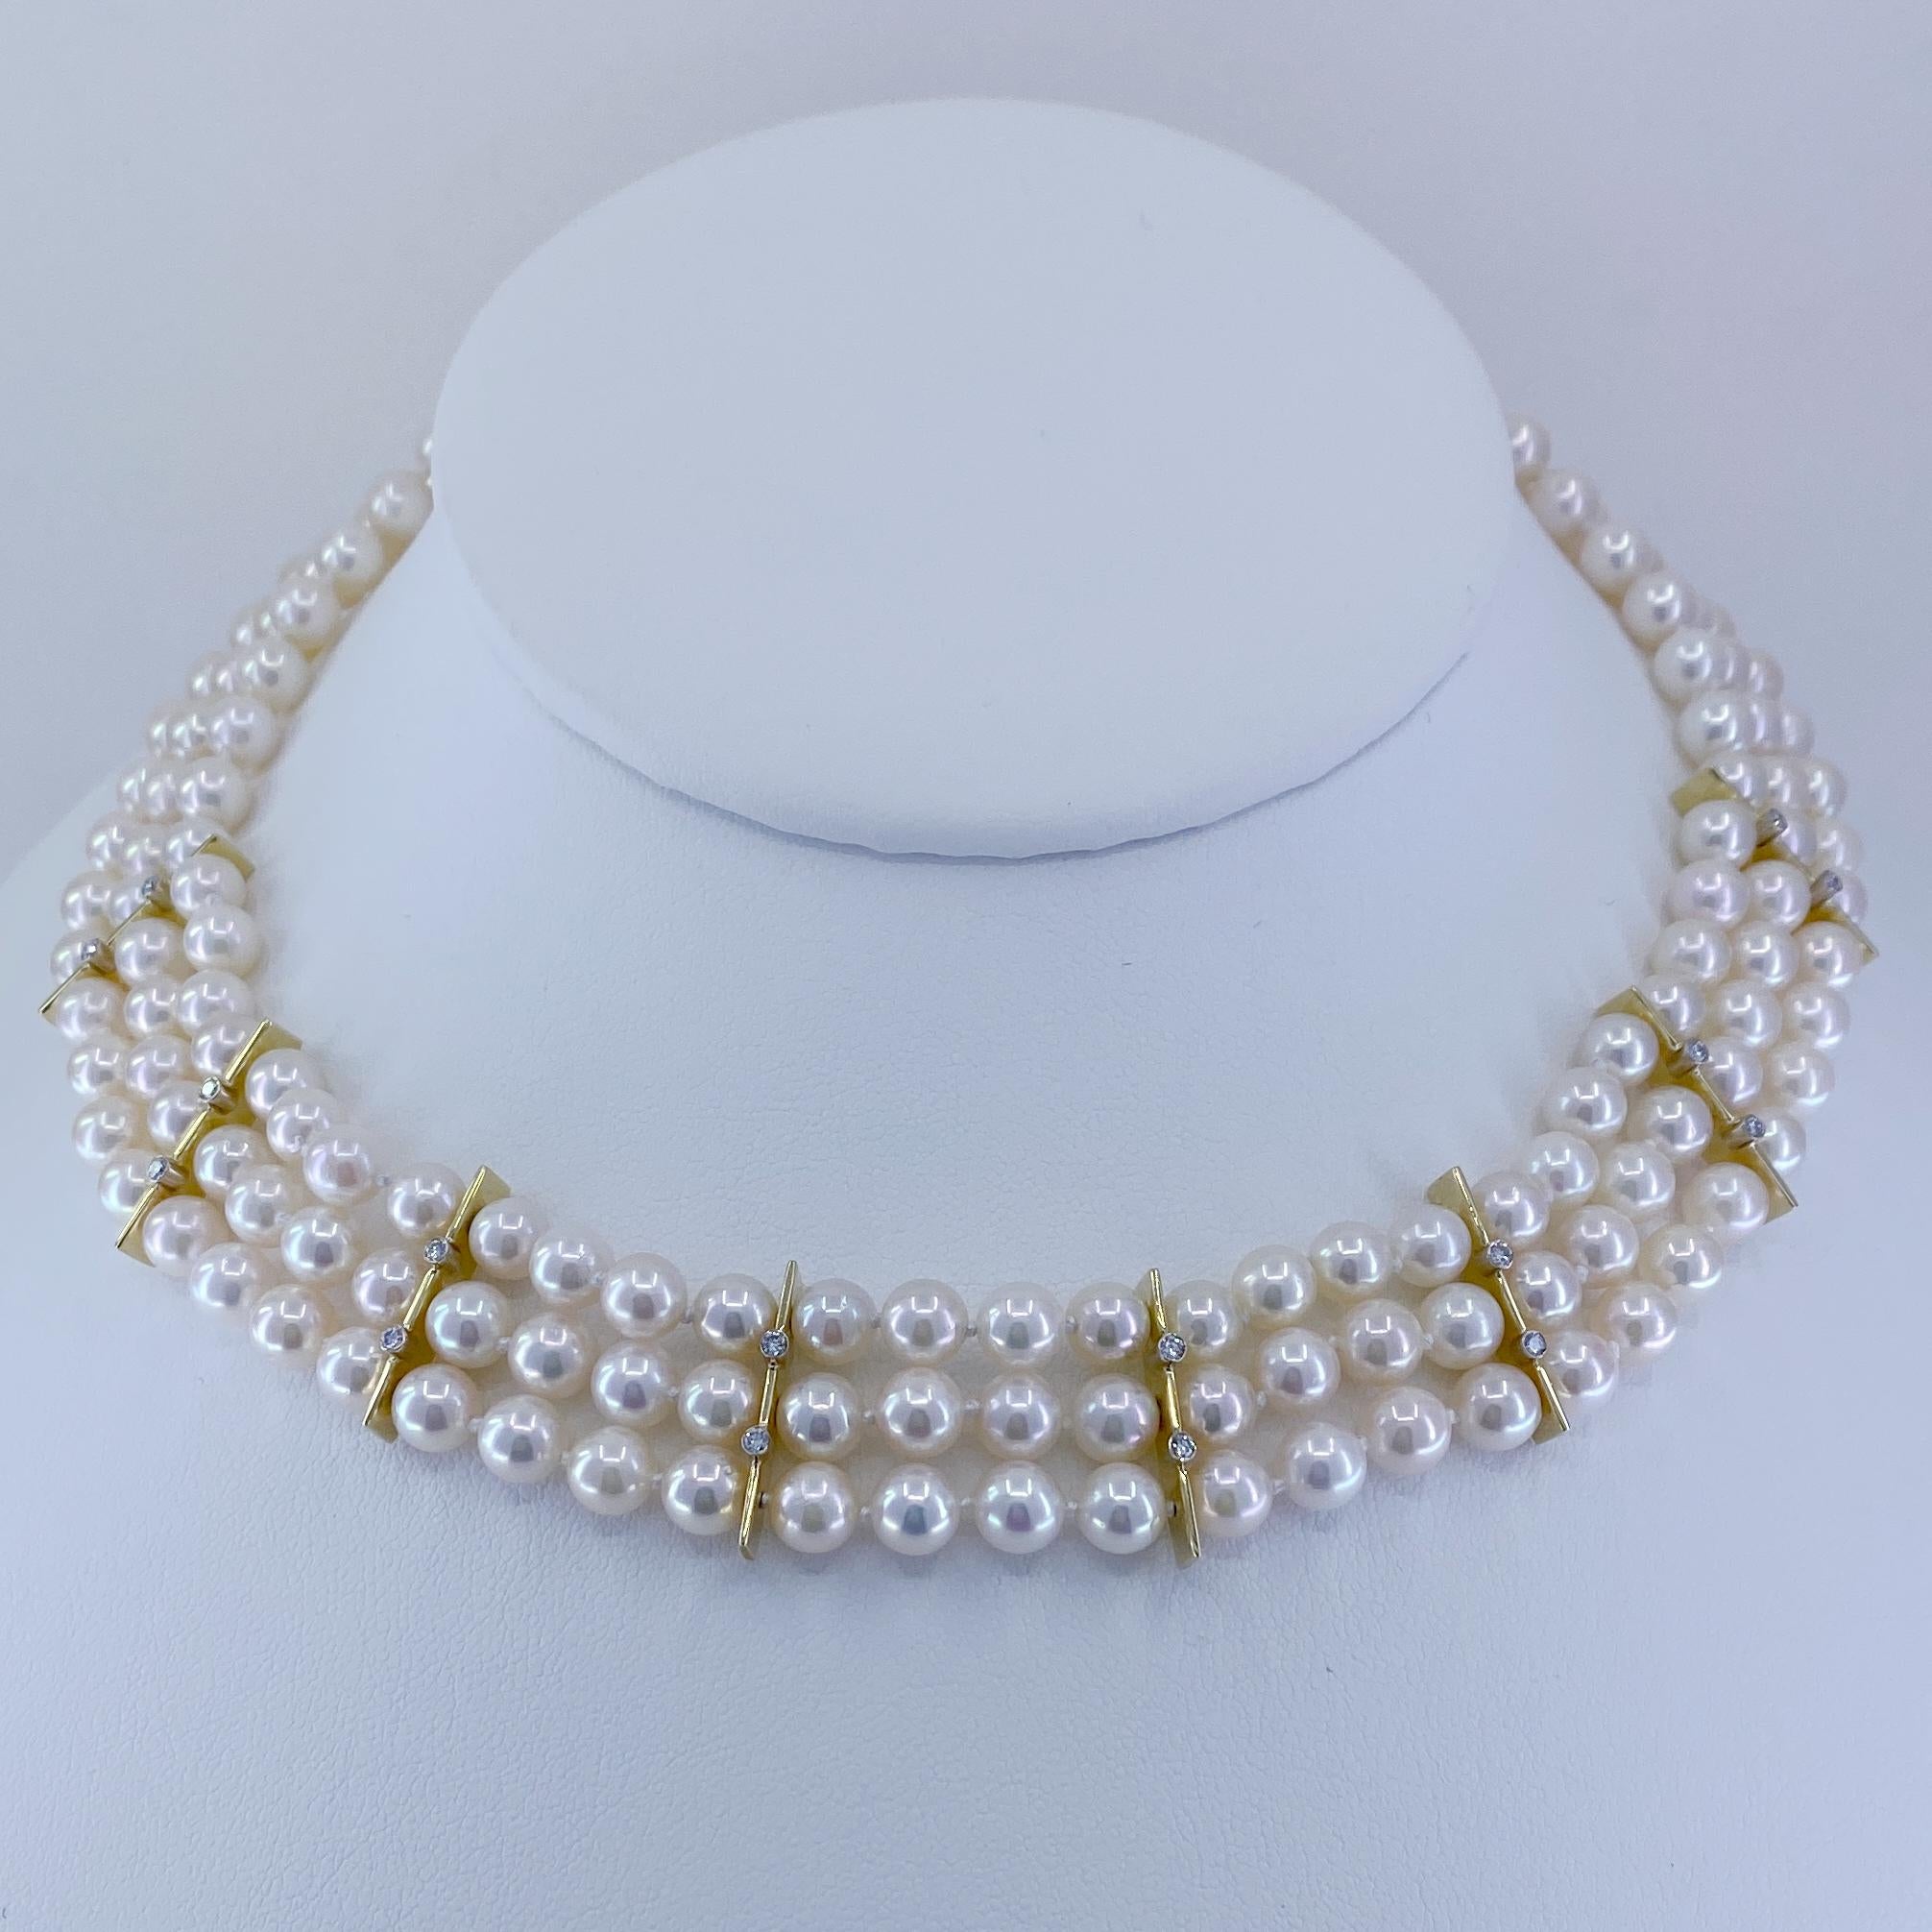 Contemporary Three-Strand Akoya Pearl Choker with Diamond Bar Accents in 18 Karat Gold For Sale